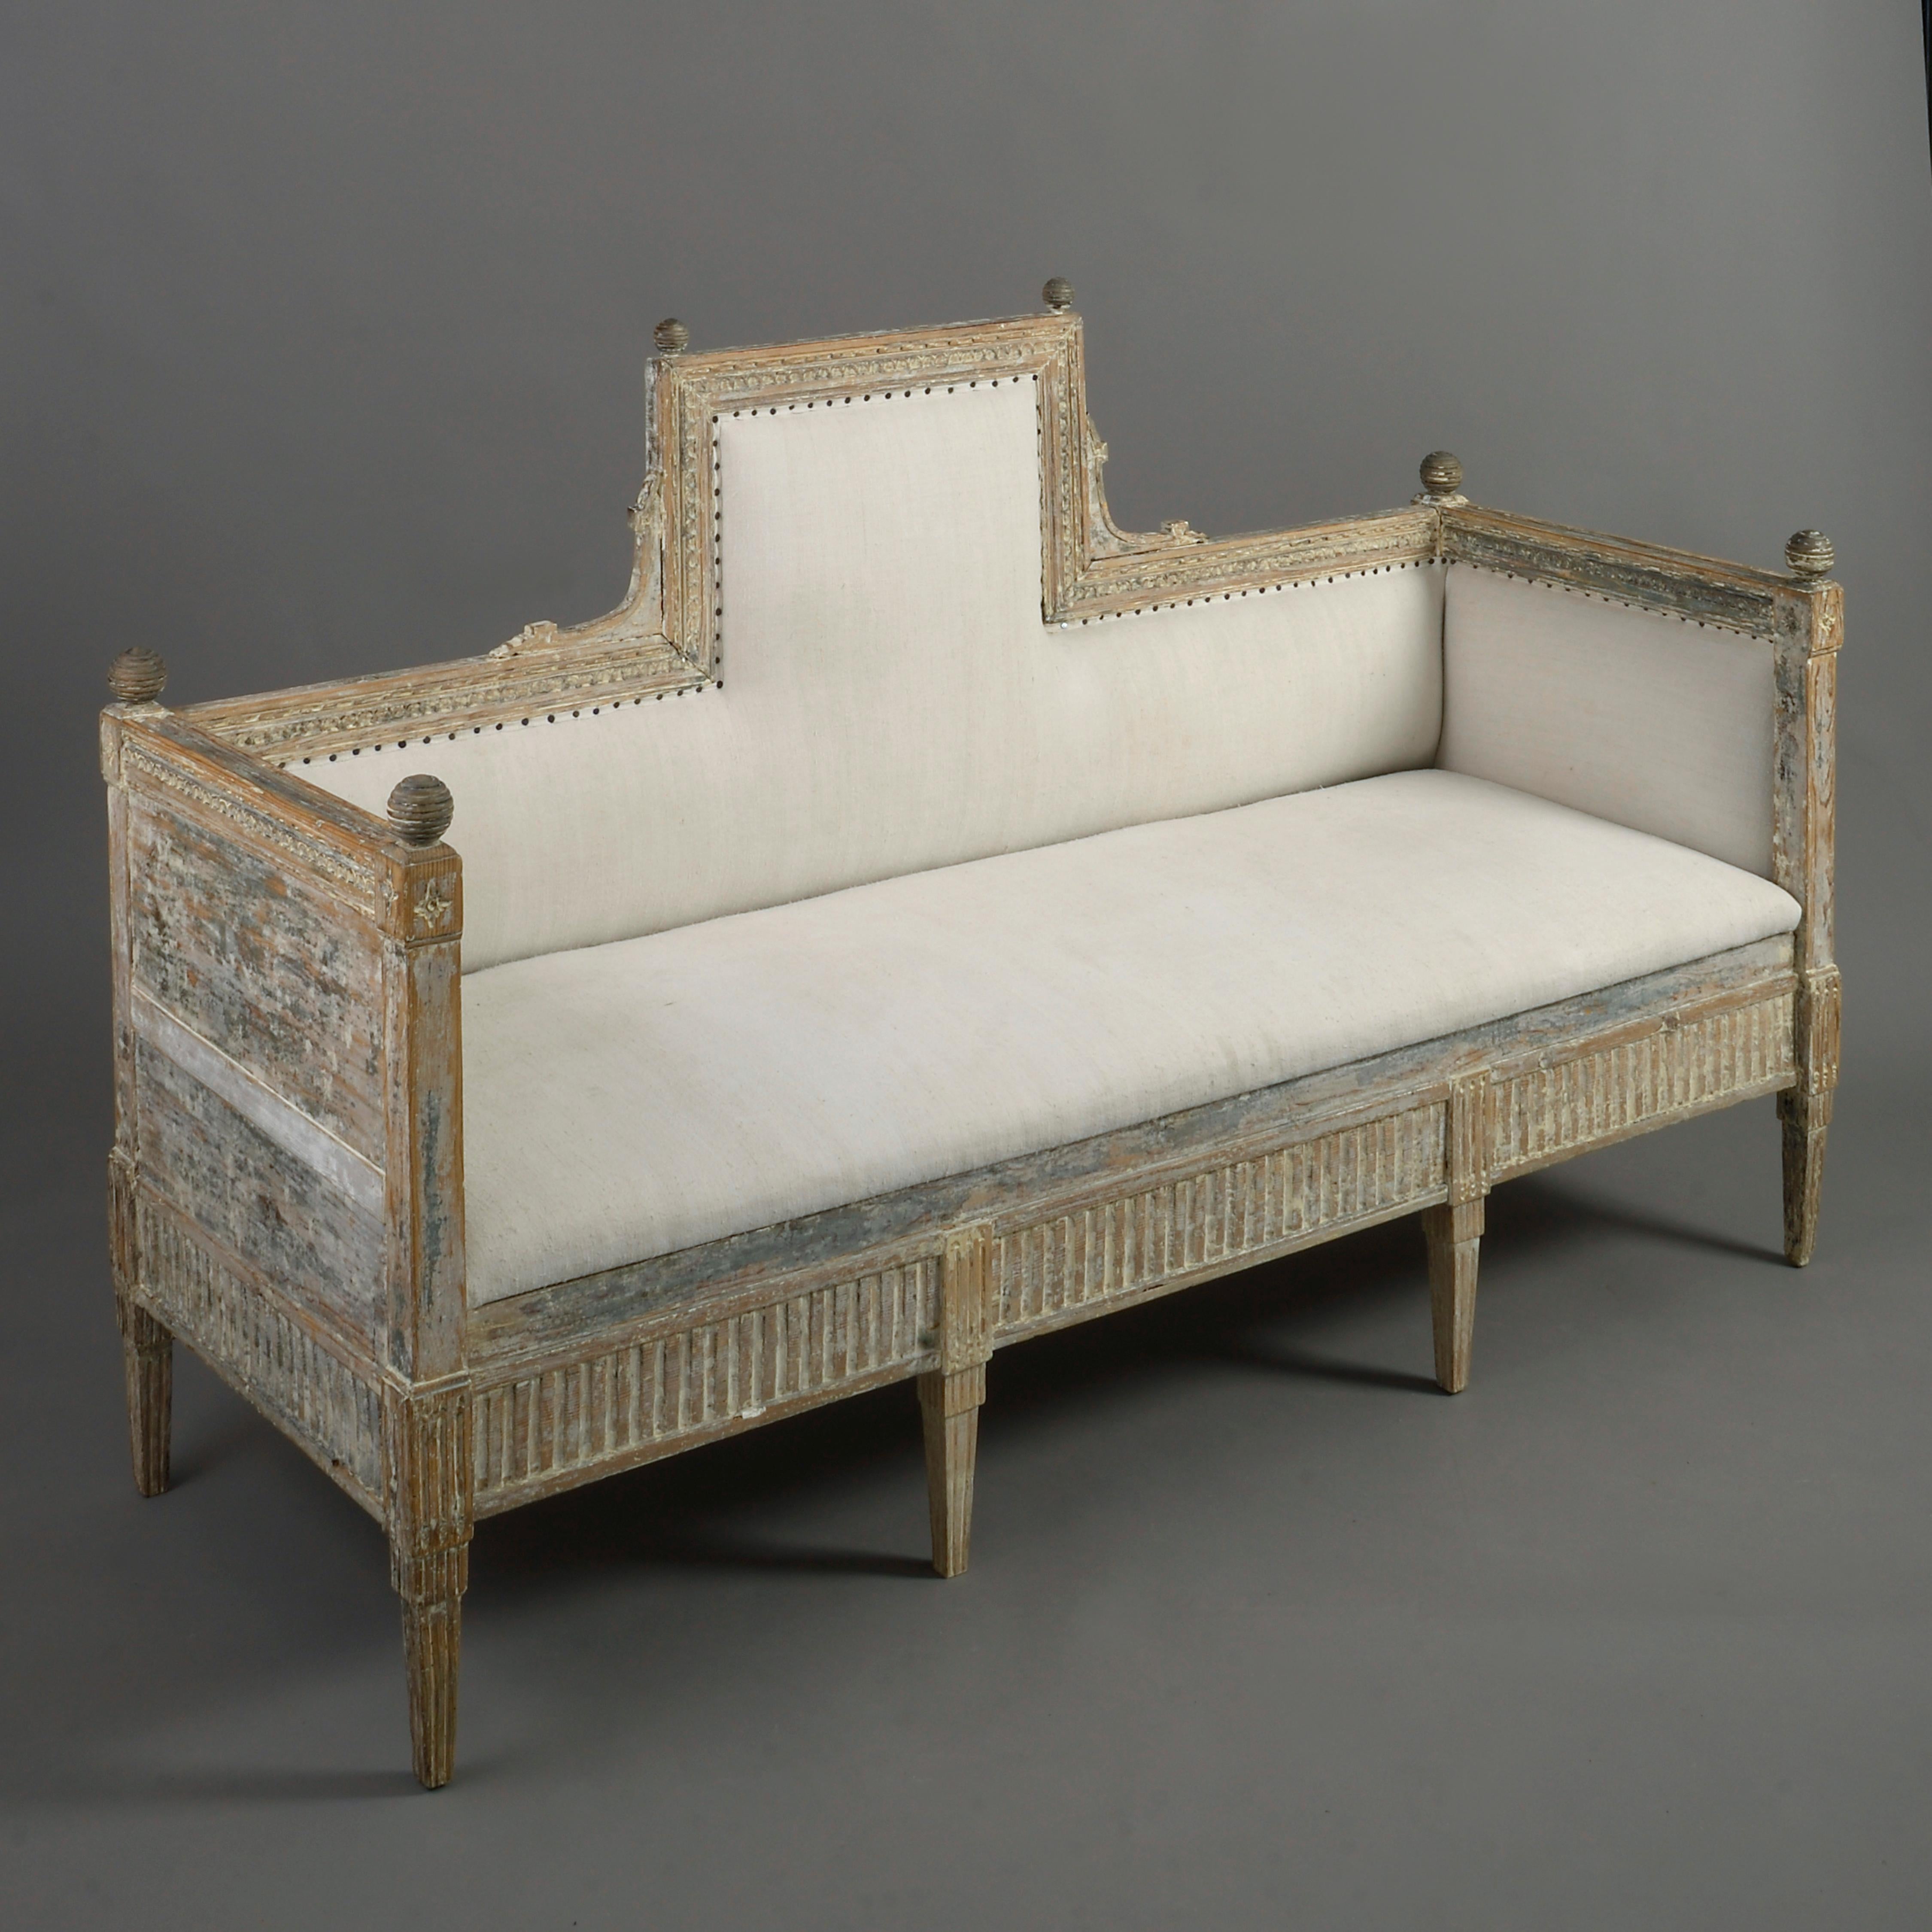 A very fine and rare late 18th century carved, painted upholstered sofa, the back with raised central section and carved with a palmette motif, the corners all surmounted with ring turned spheres, all above a fluted frieze and supported upon square